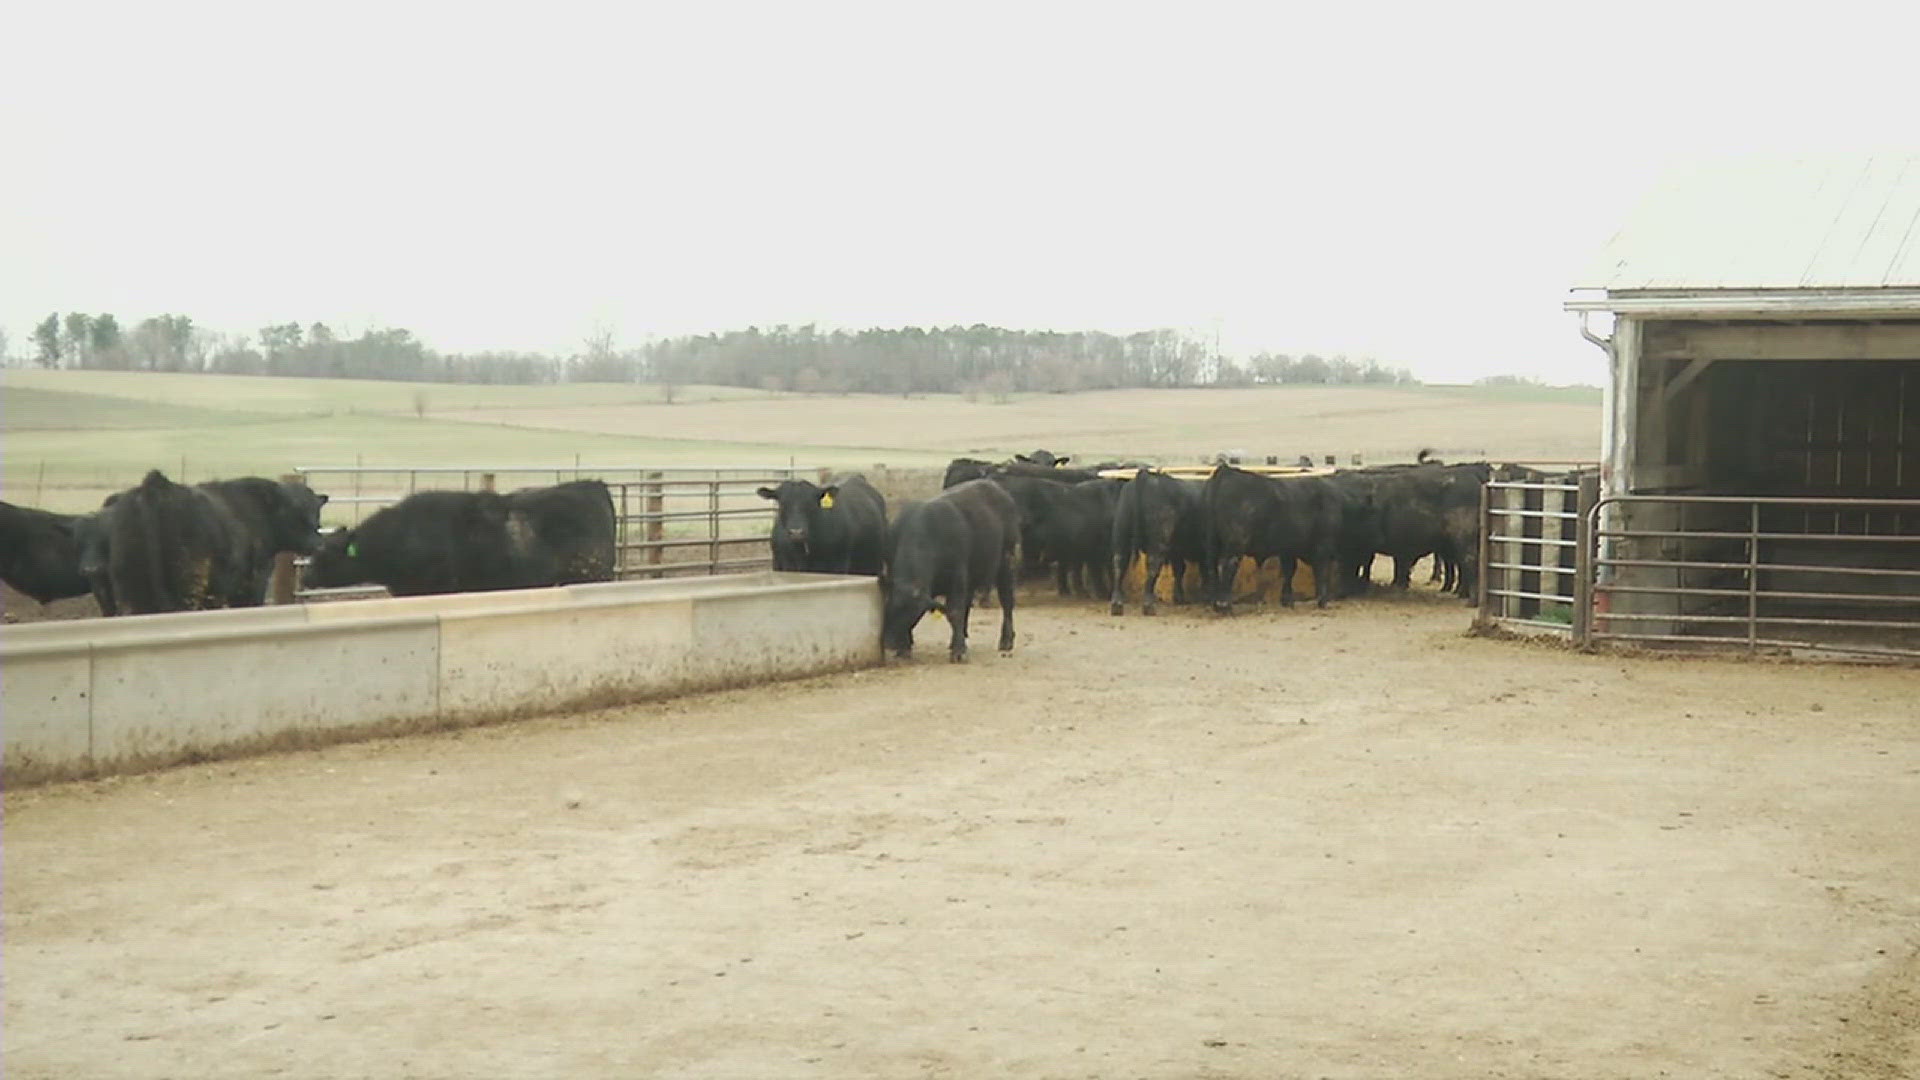 Cattle farmers looking to transport cows across state lines will need extra examinations, per the new USDA guidelines, as bird flu infections among cows remain high.